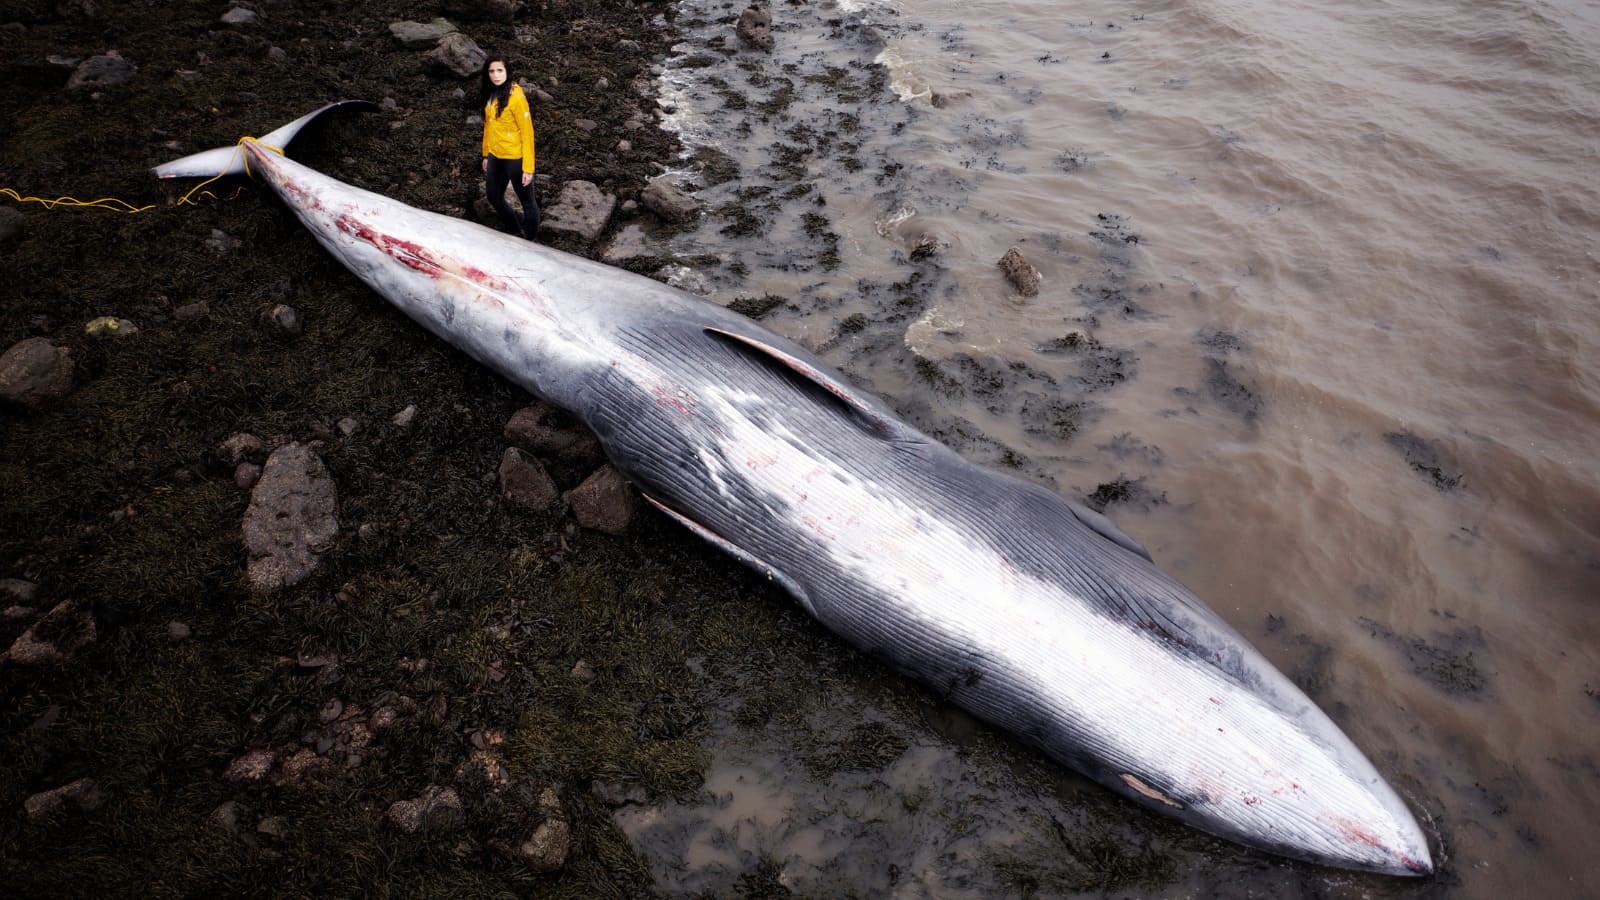 A whale lies deceased on a beach - someone stands next to the whale looking very small in comparison